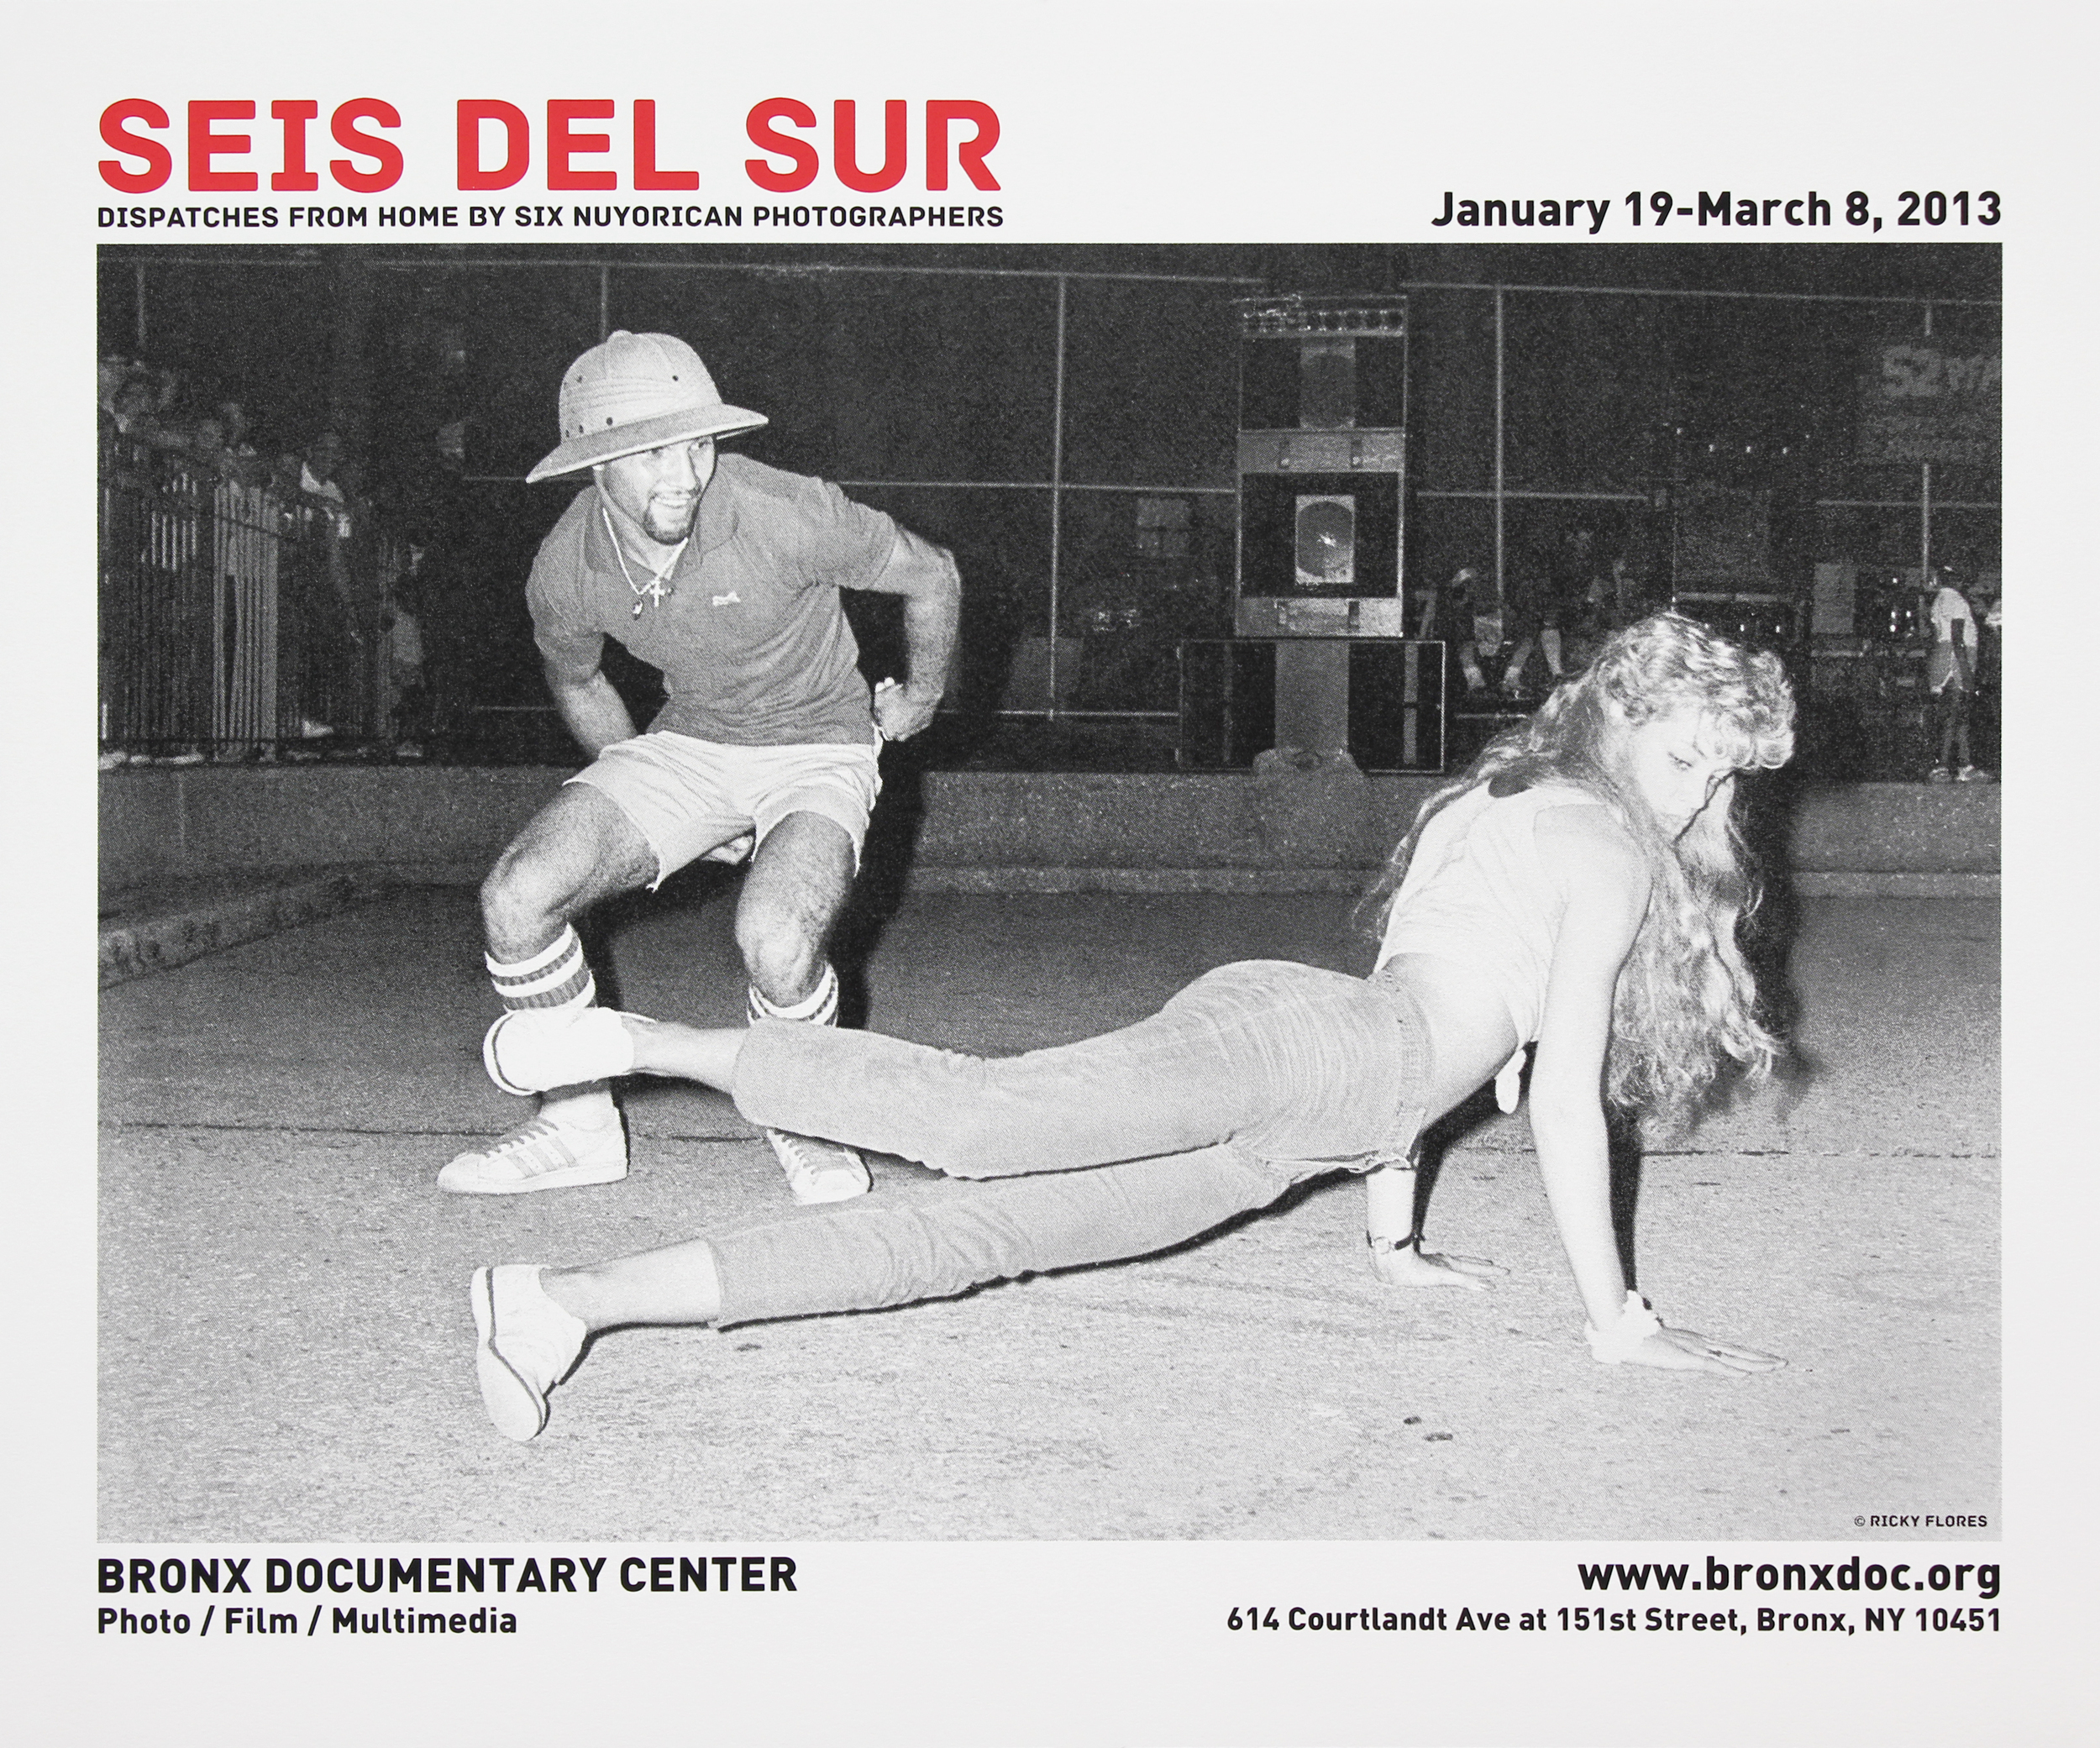 Bronx Doc Center - Seis Del Sur: Dispatches From Home by Six Nuyorican Photographers